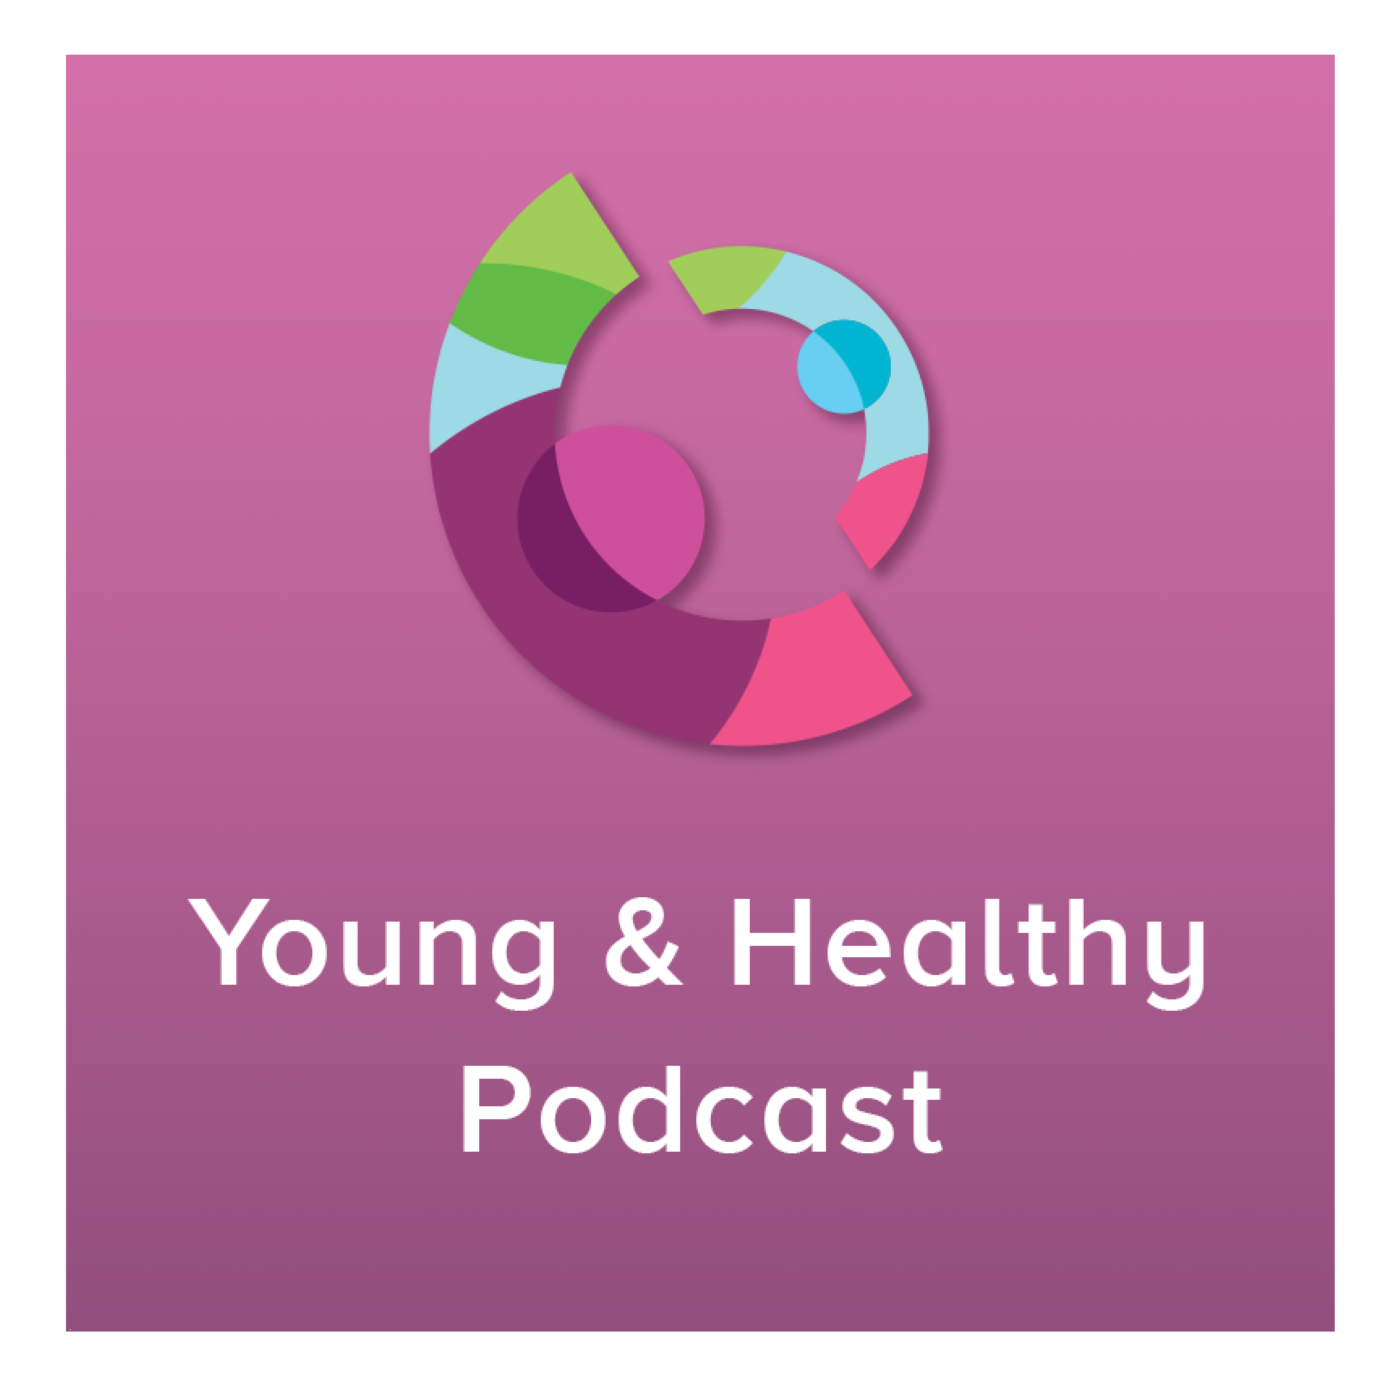 A colorful symbol on purple background. Text: Young & Healthy Podcast